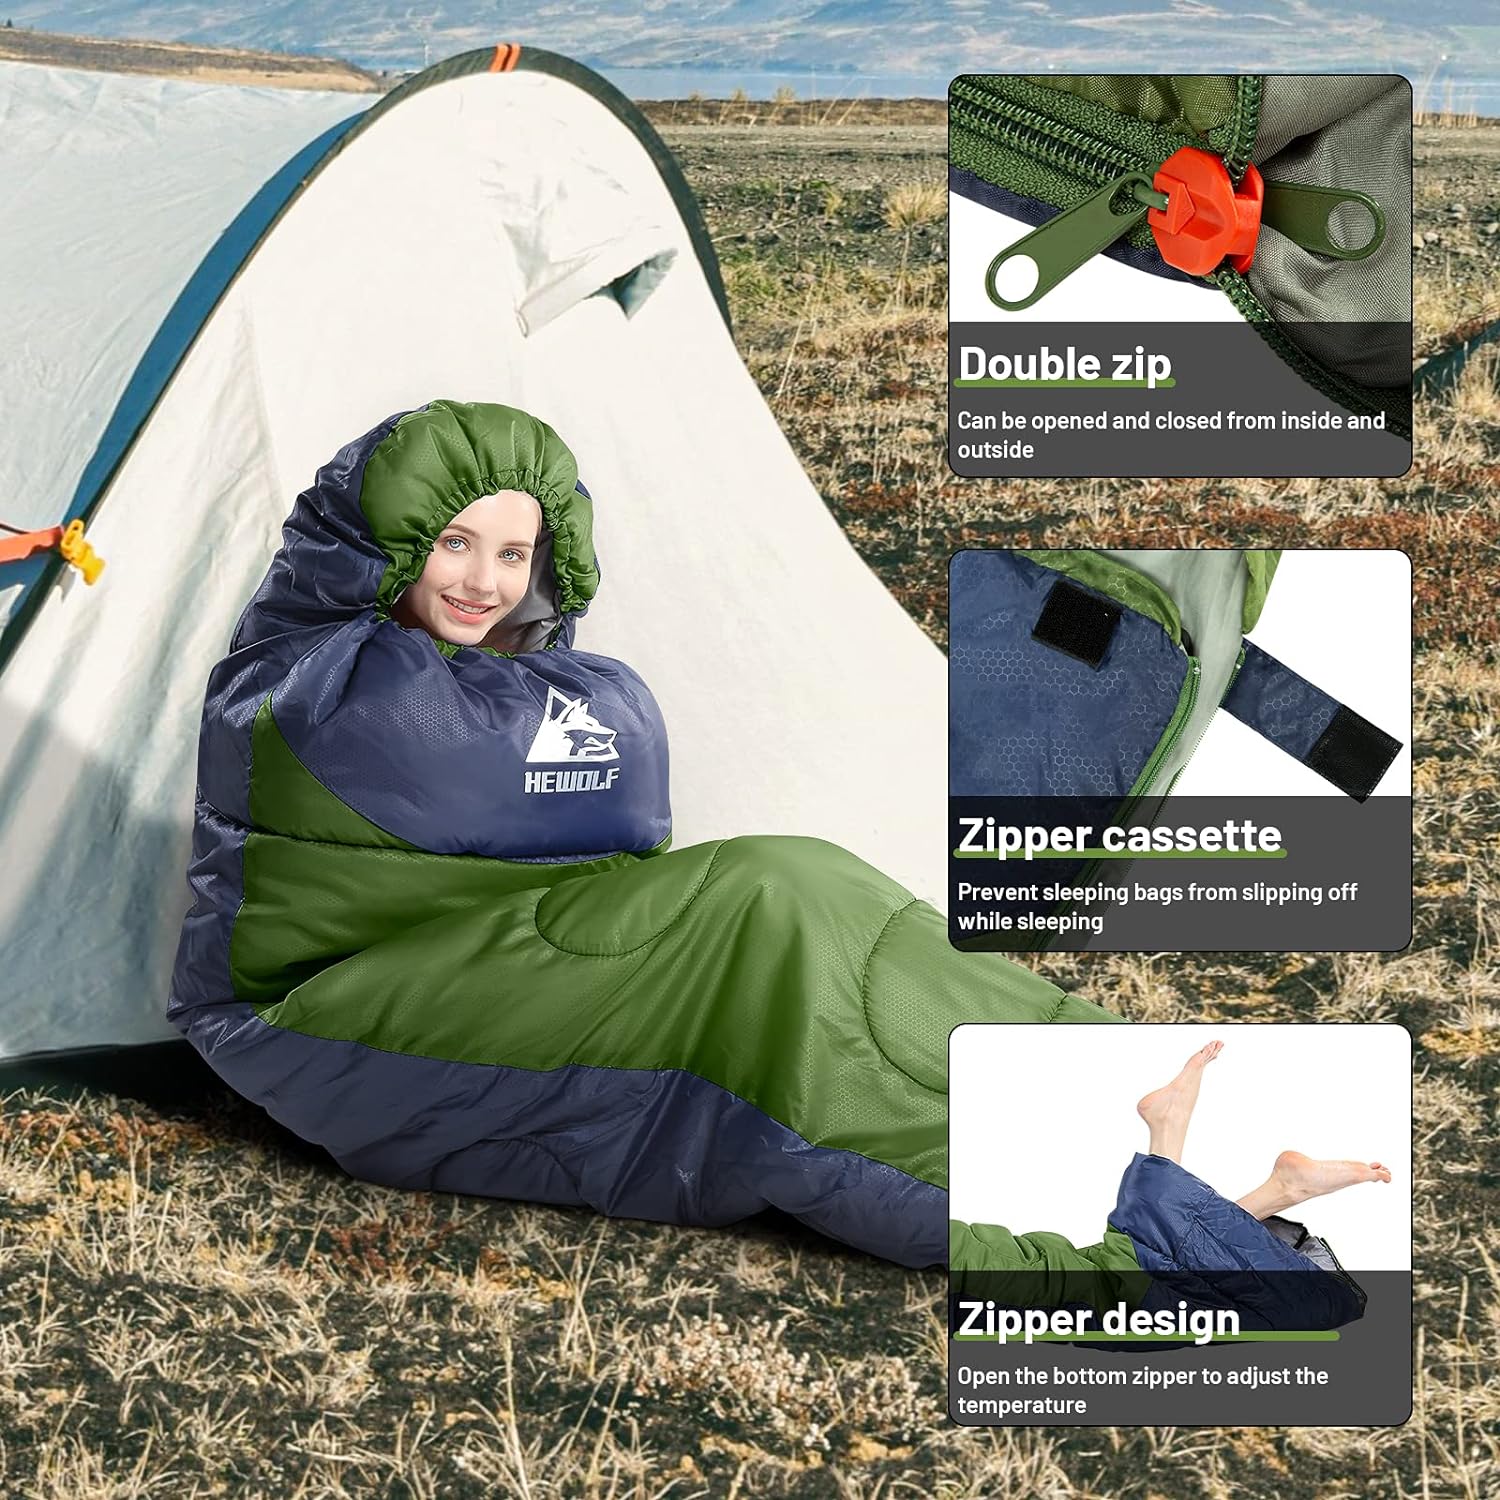 CAMEL CROWN Sleeping Bag Lightweight Warm Envelope Sleeping Bags With Compression Sack For Kids Adults 3 Seasons Outdoor Travel Camping